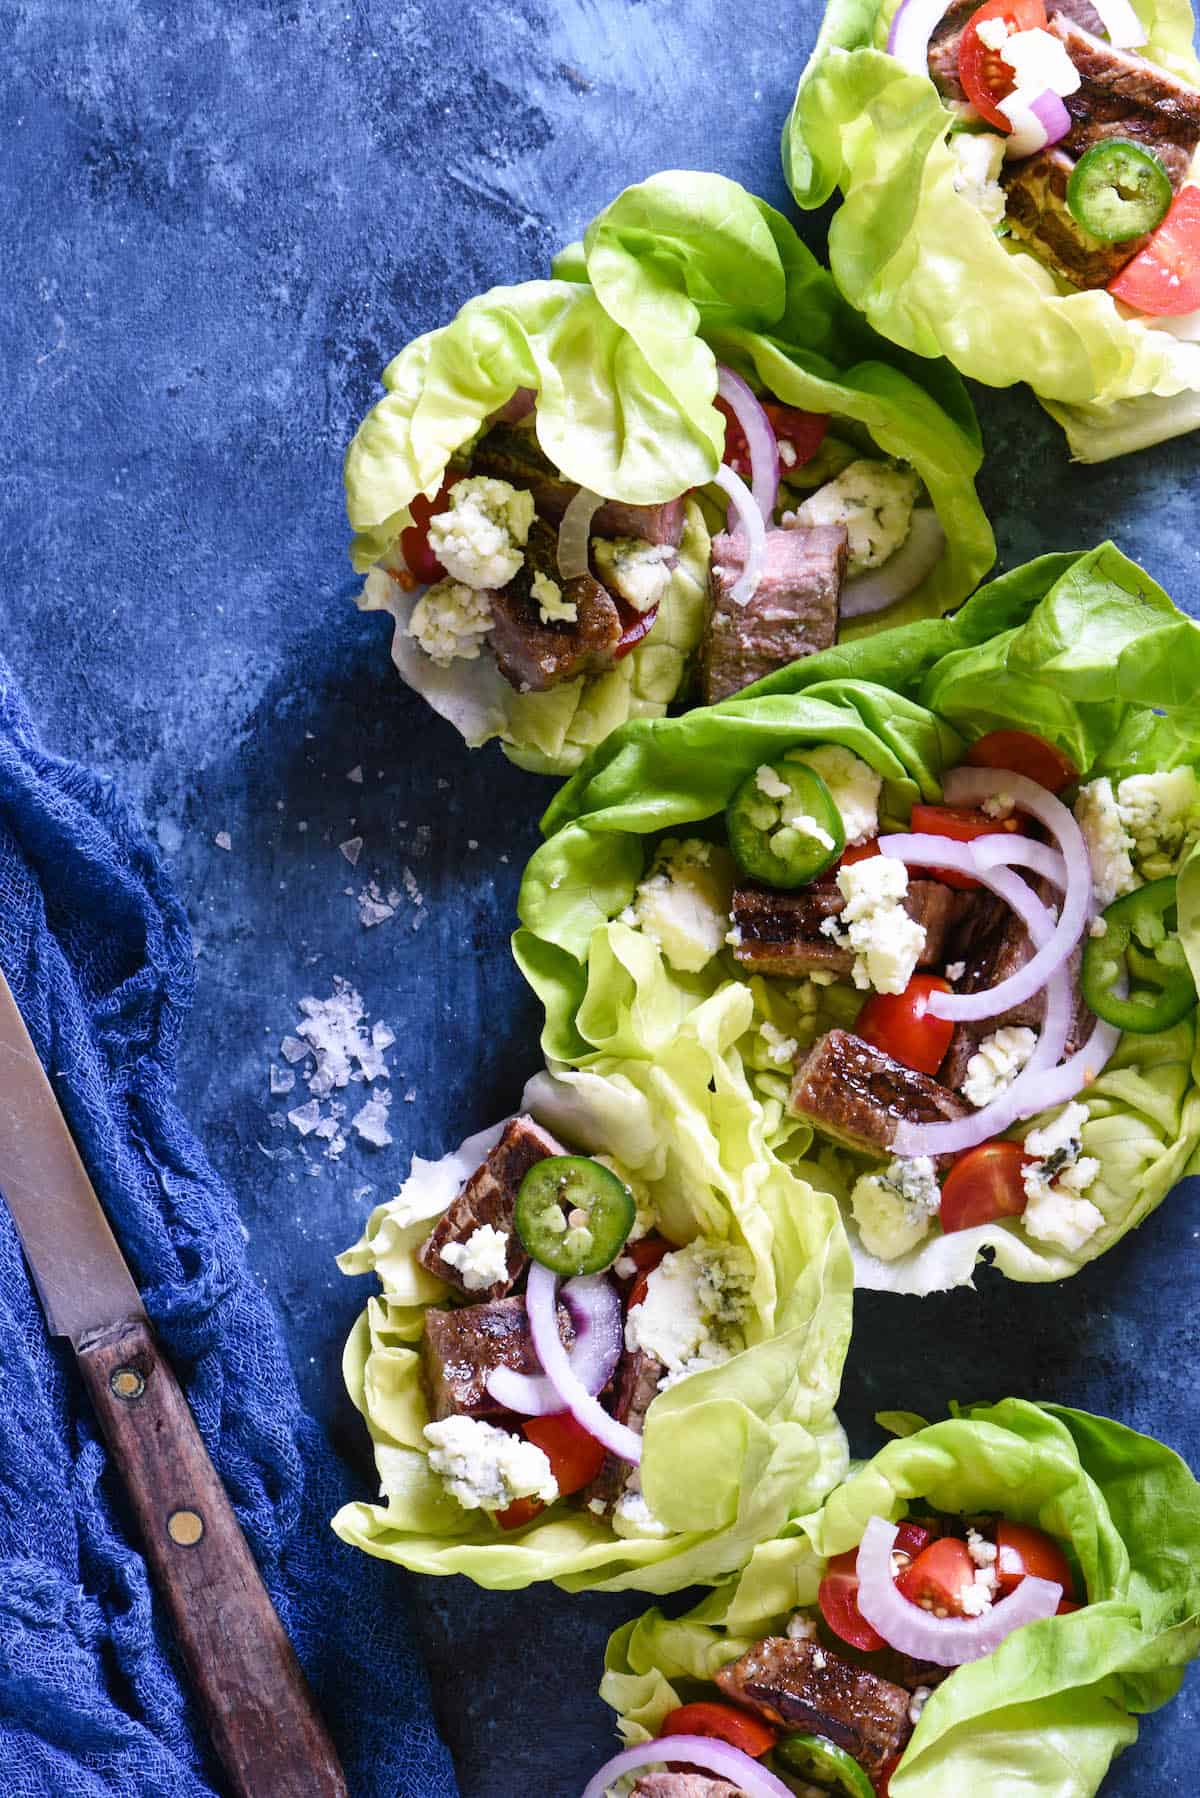 Butter lettuce leaves filled with steak, blue cheese, tomatoes and onions on a blue background.